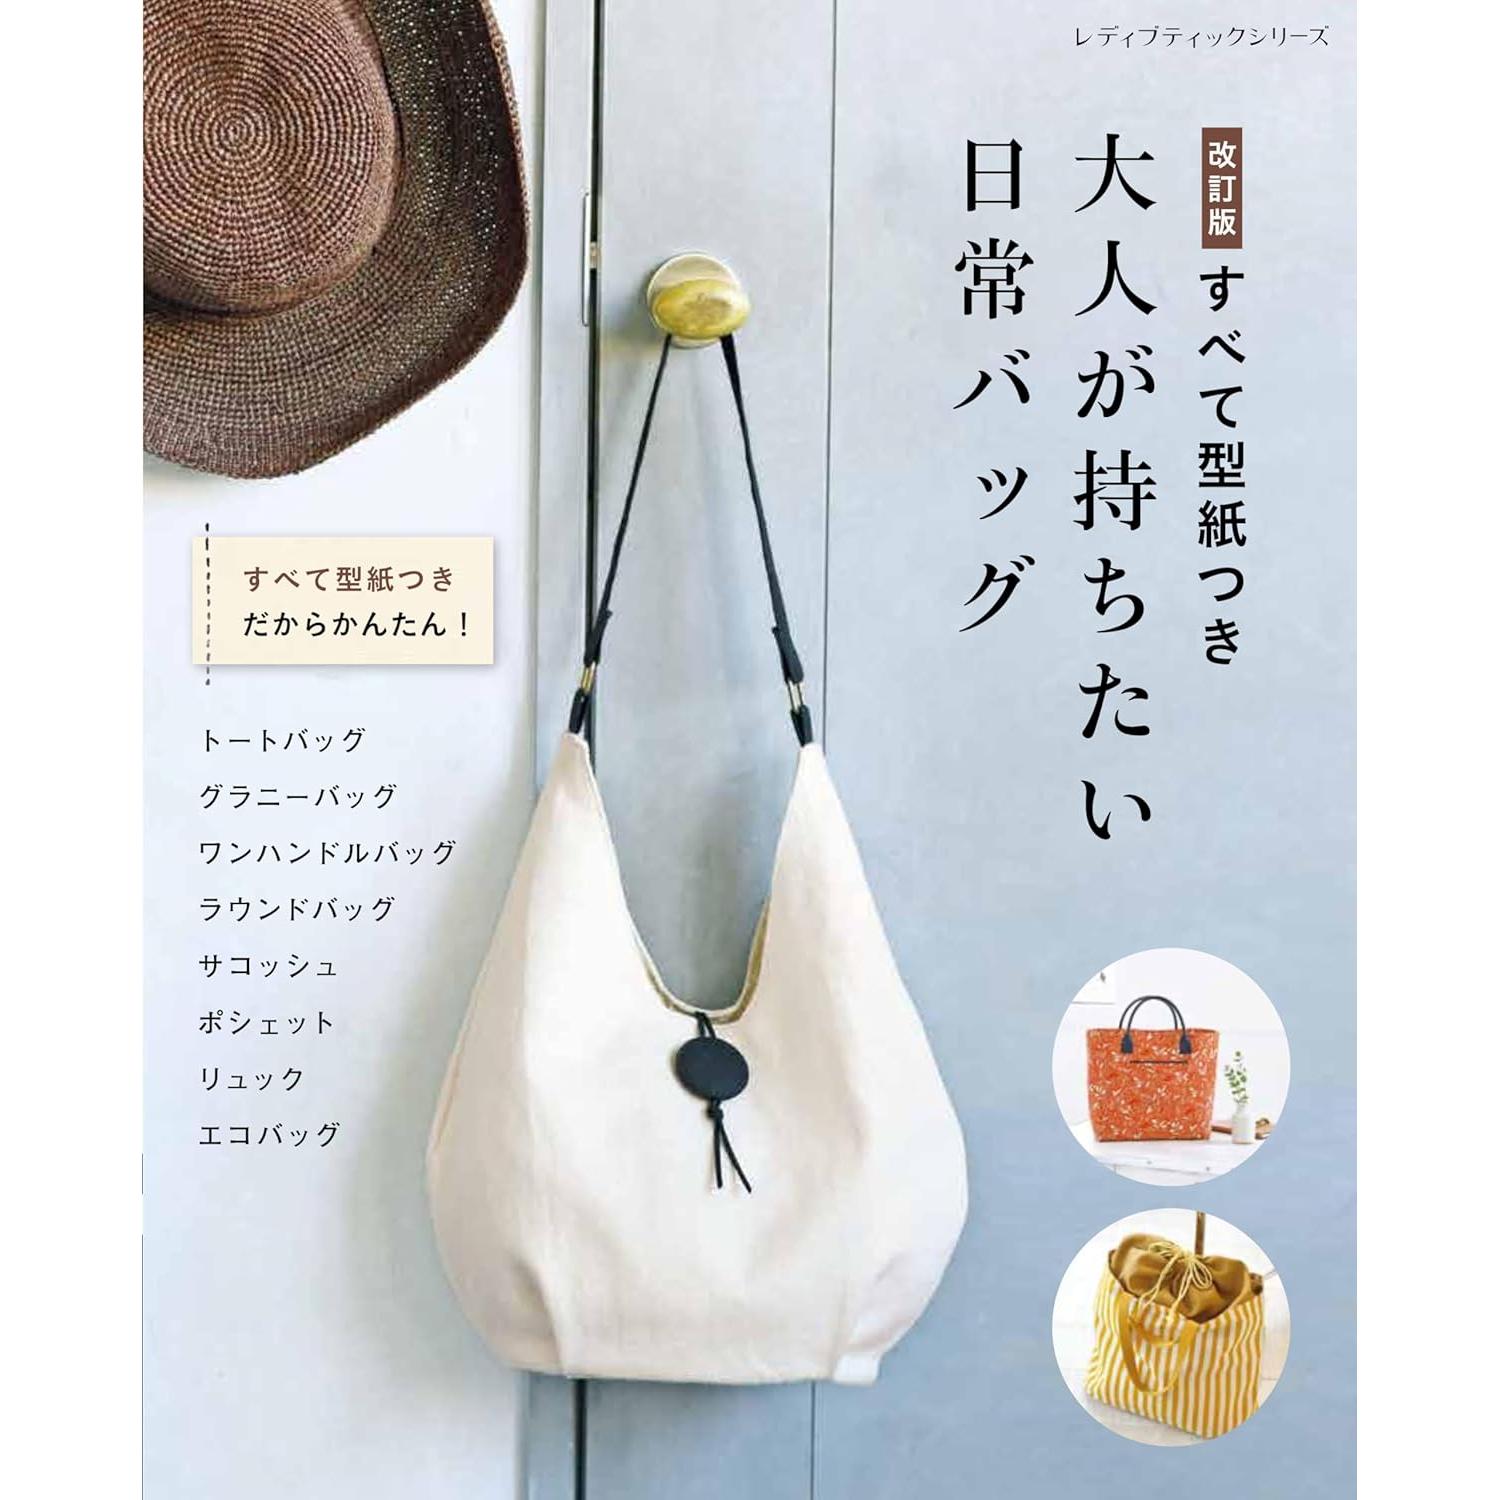 S8493 (Revised) All patterns are included.(book)